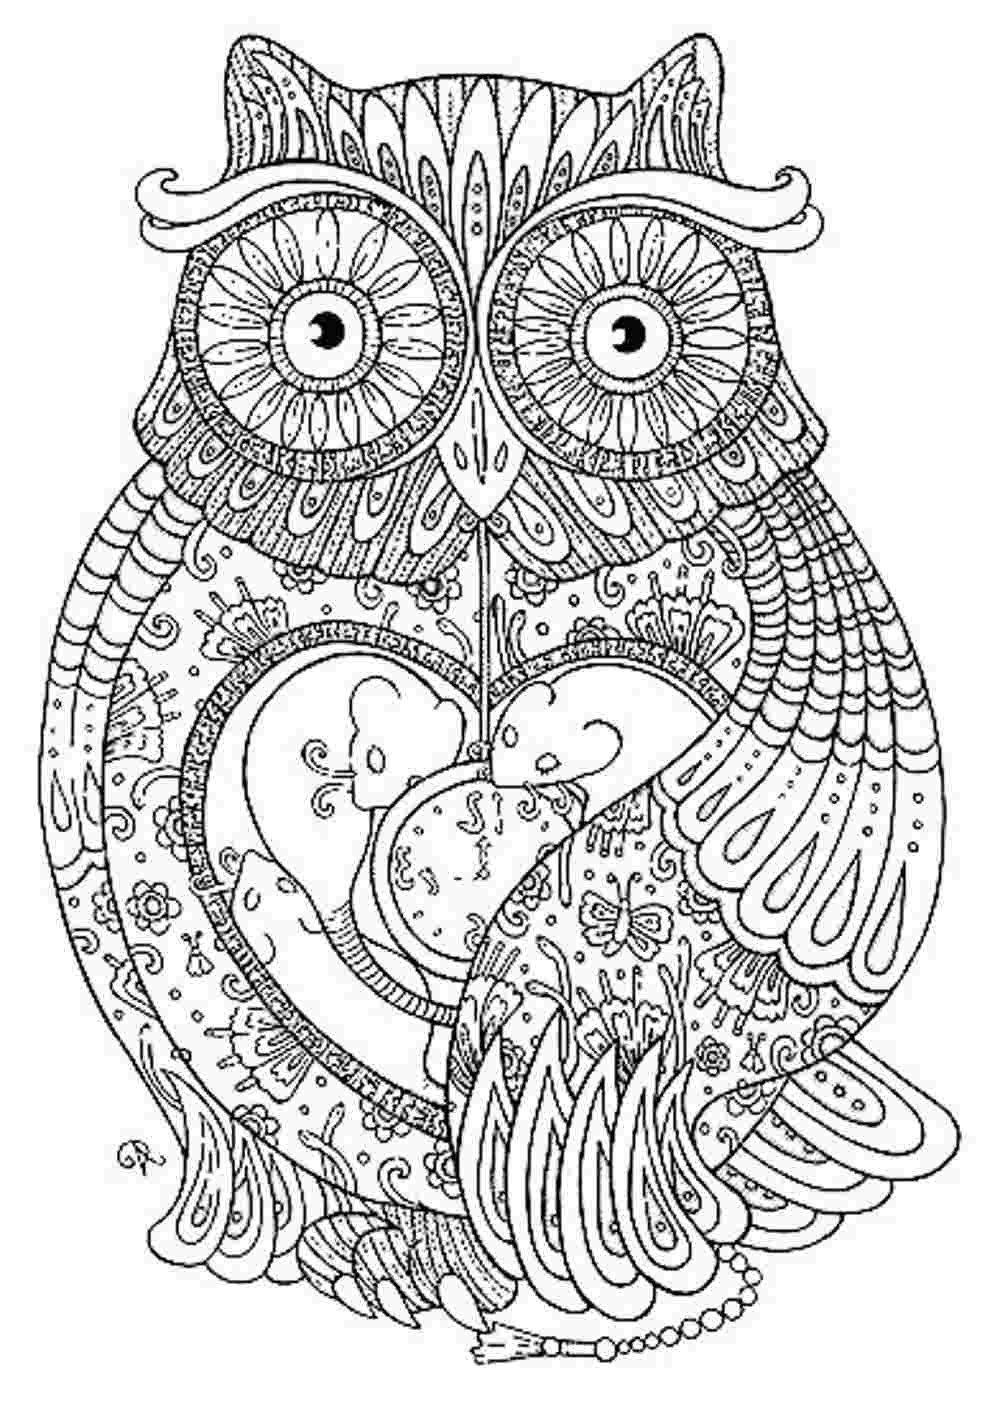 Adult Coloring Book Images
 Free Printable Coloring Book Pages Best Adult Coloring